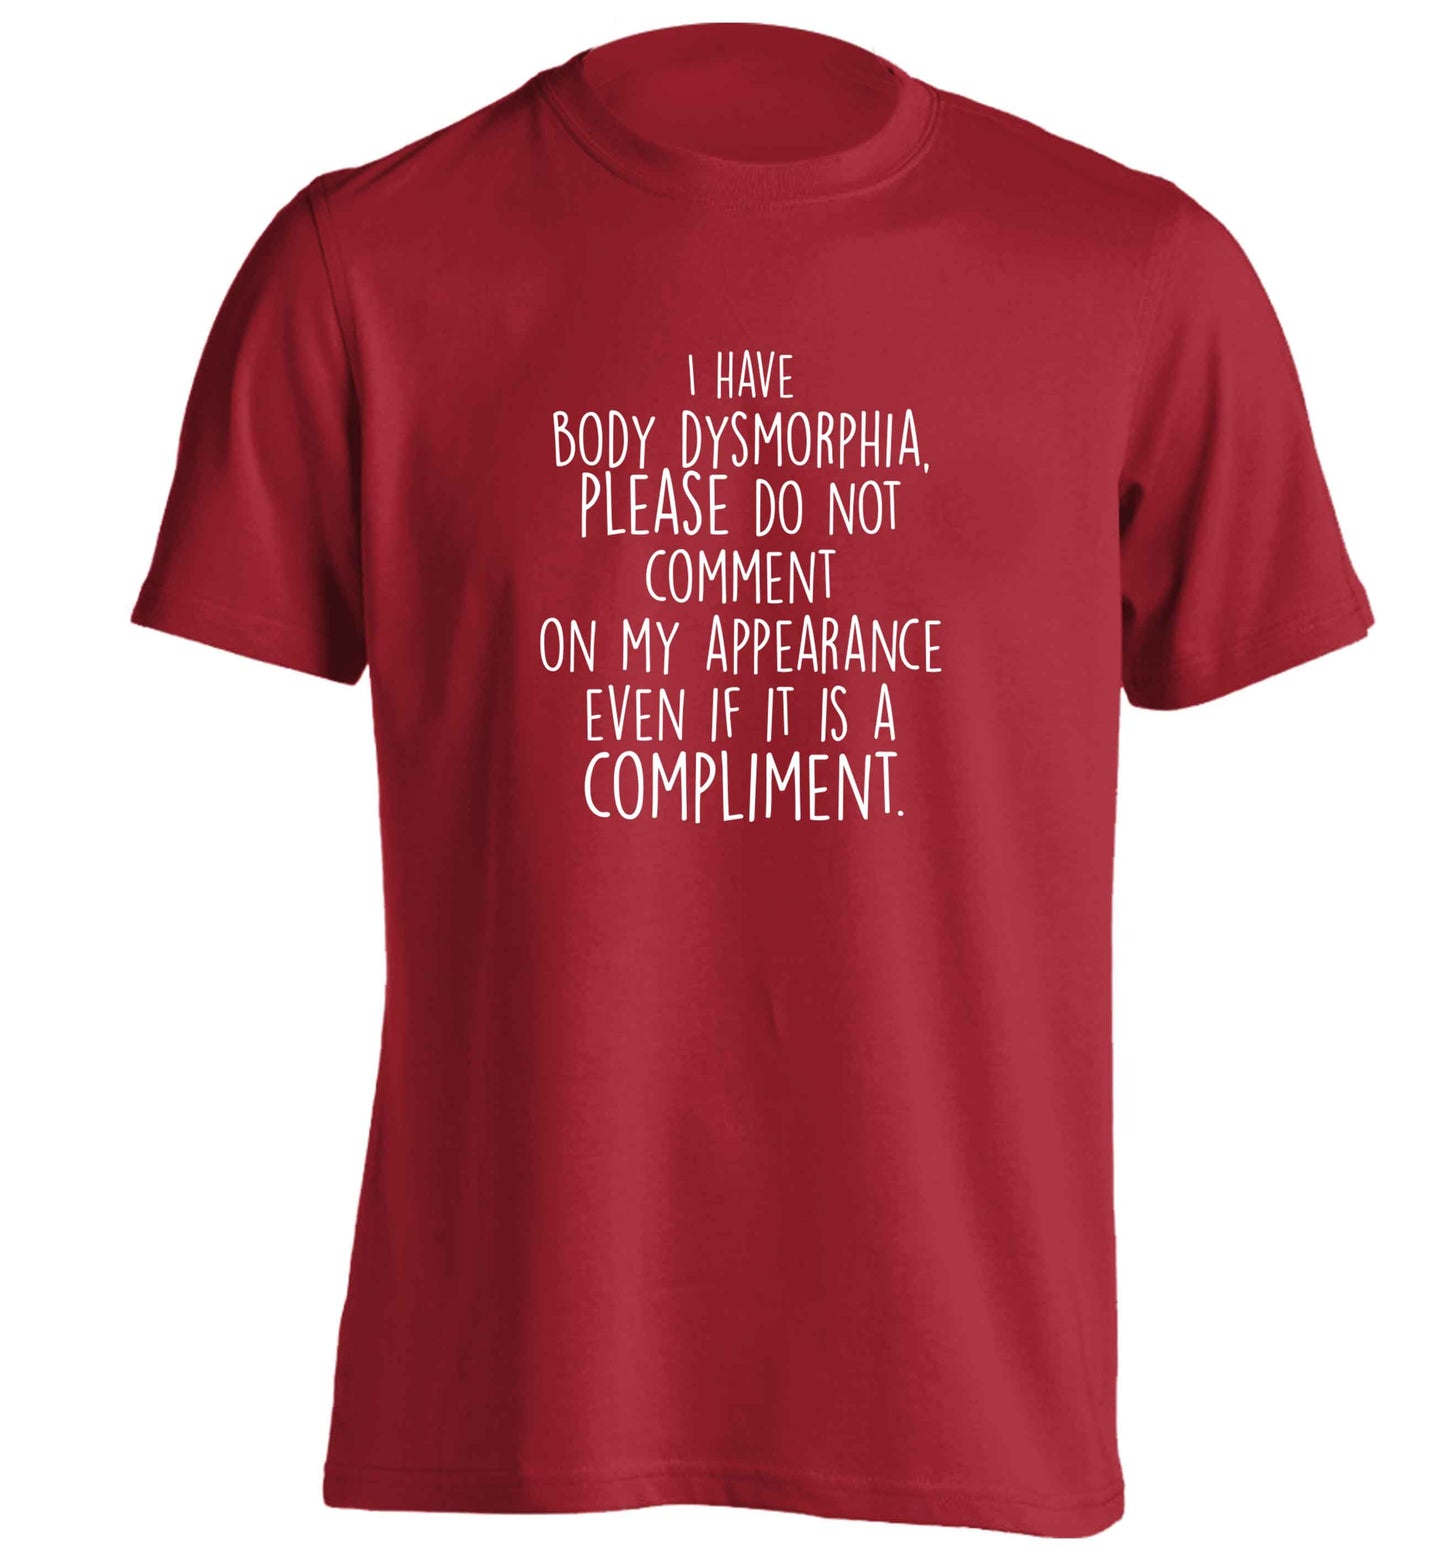 I have body dysmorphia, please do not comment on my appearance even if it is a compliment adults unisex red Tshirt 2XL